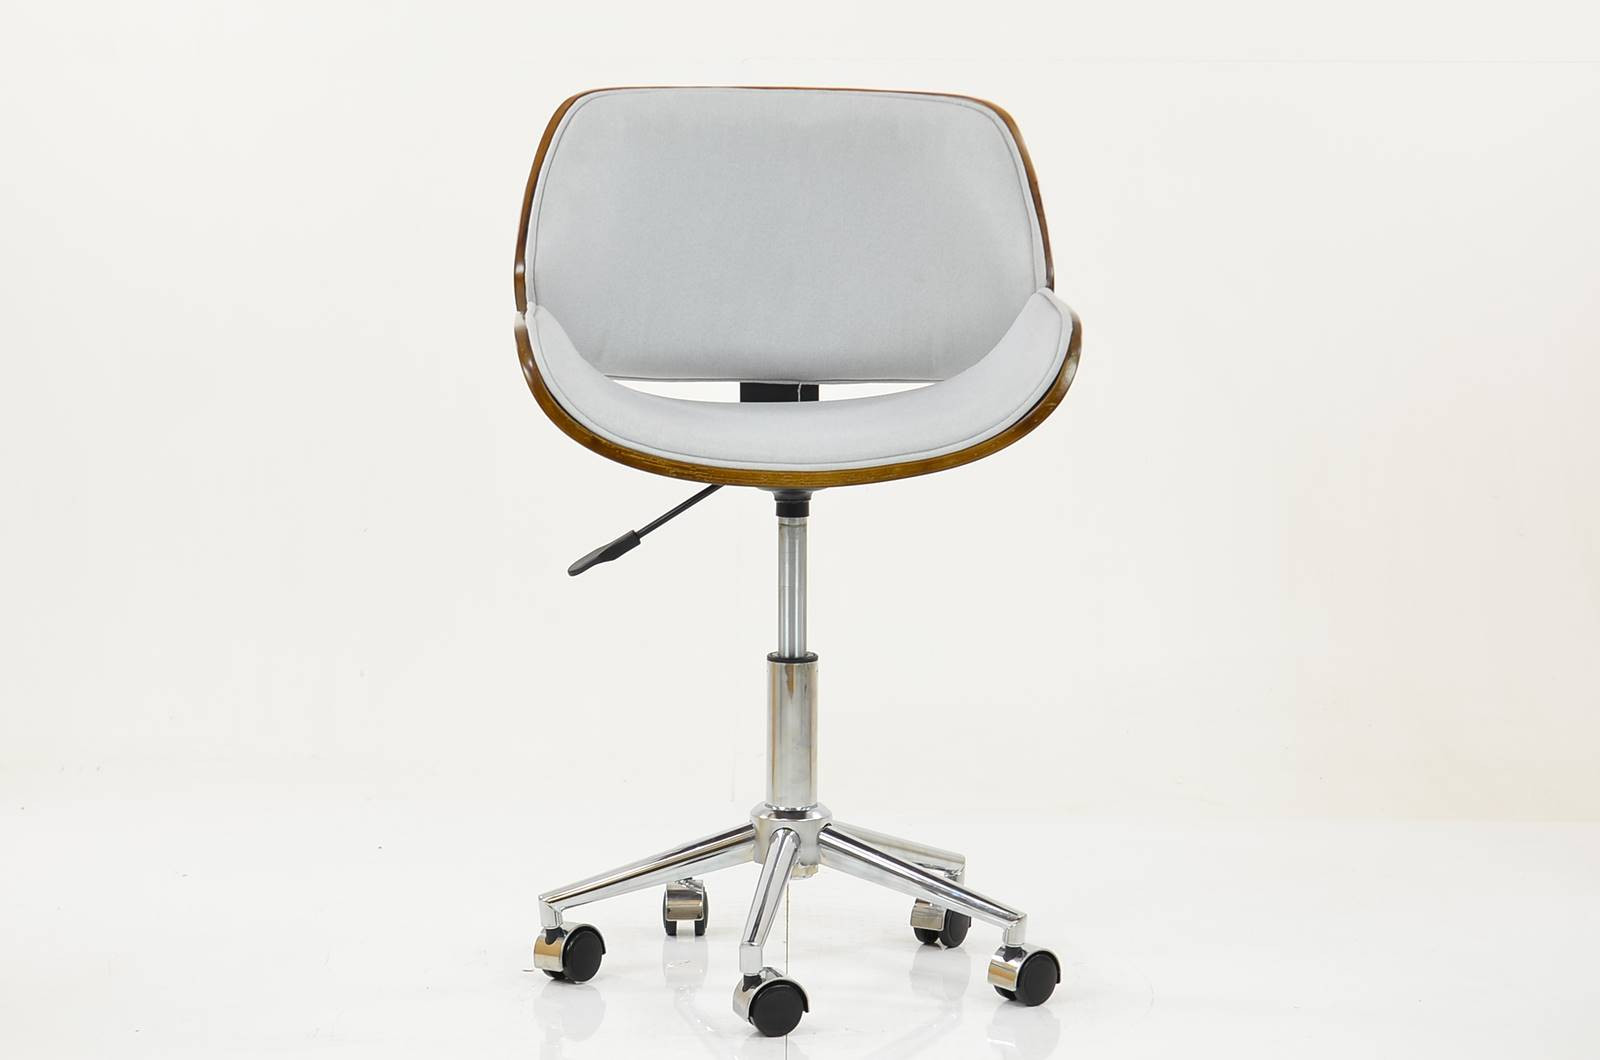 Budget Designer Wooden Shell Chair with chrome base faux leather light grey seat and back